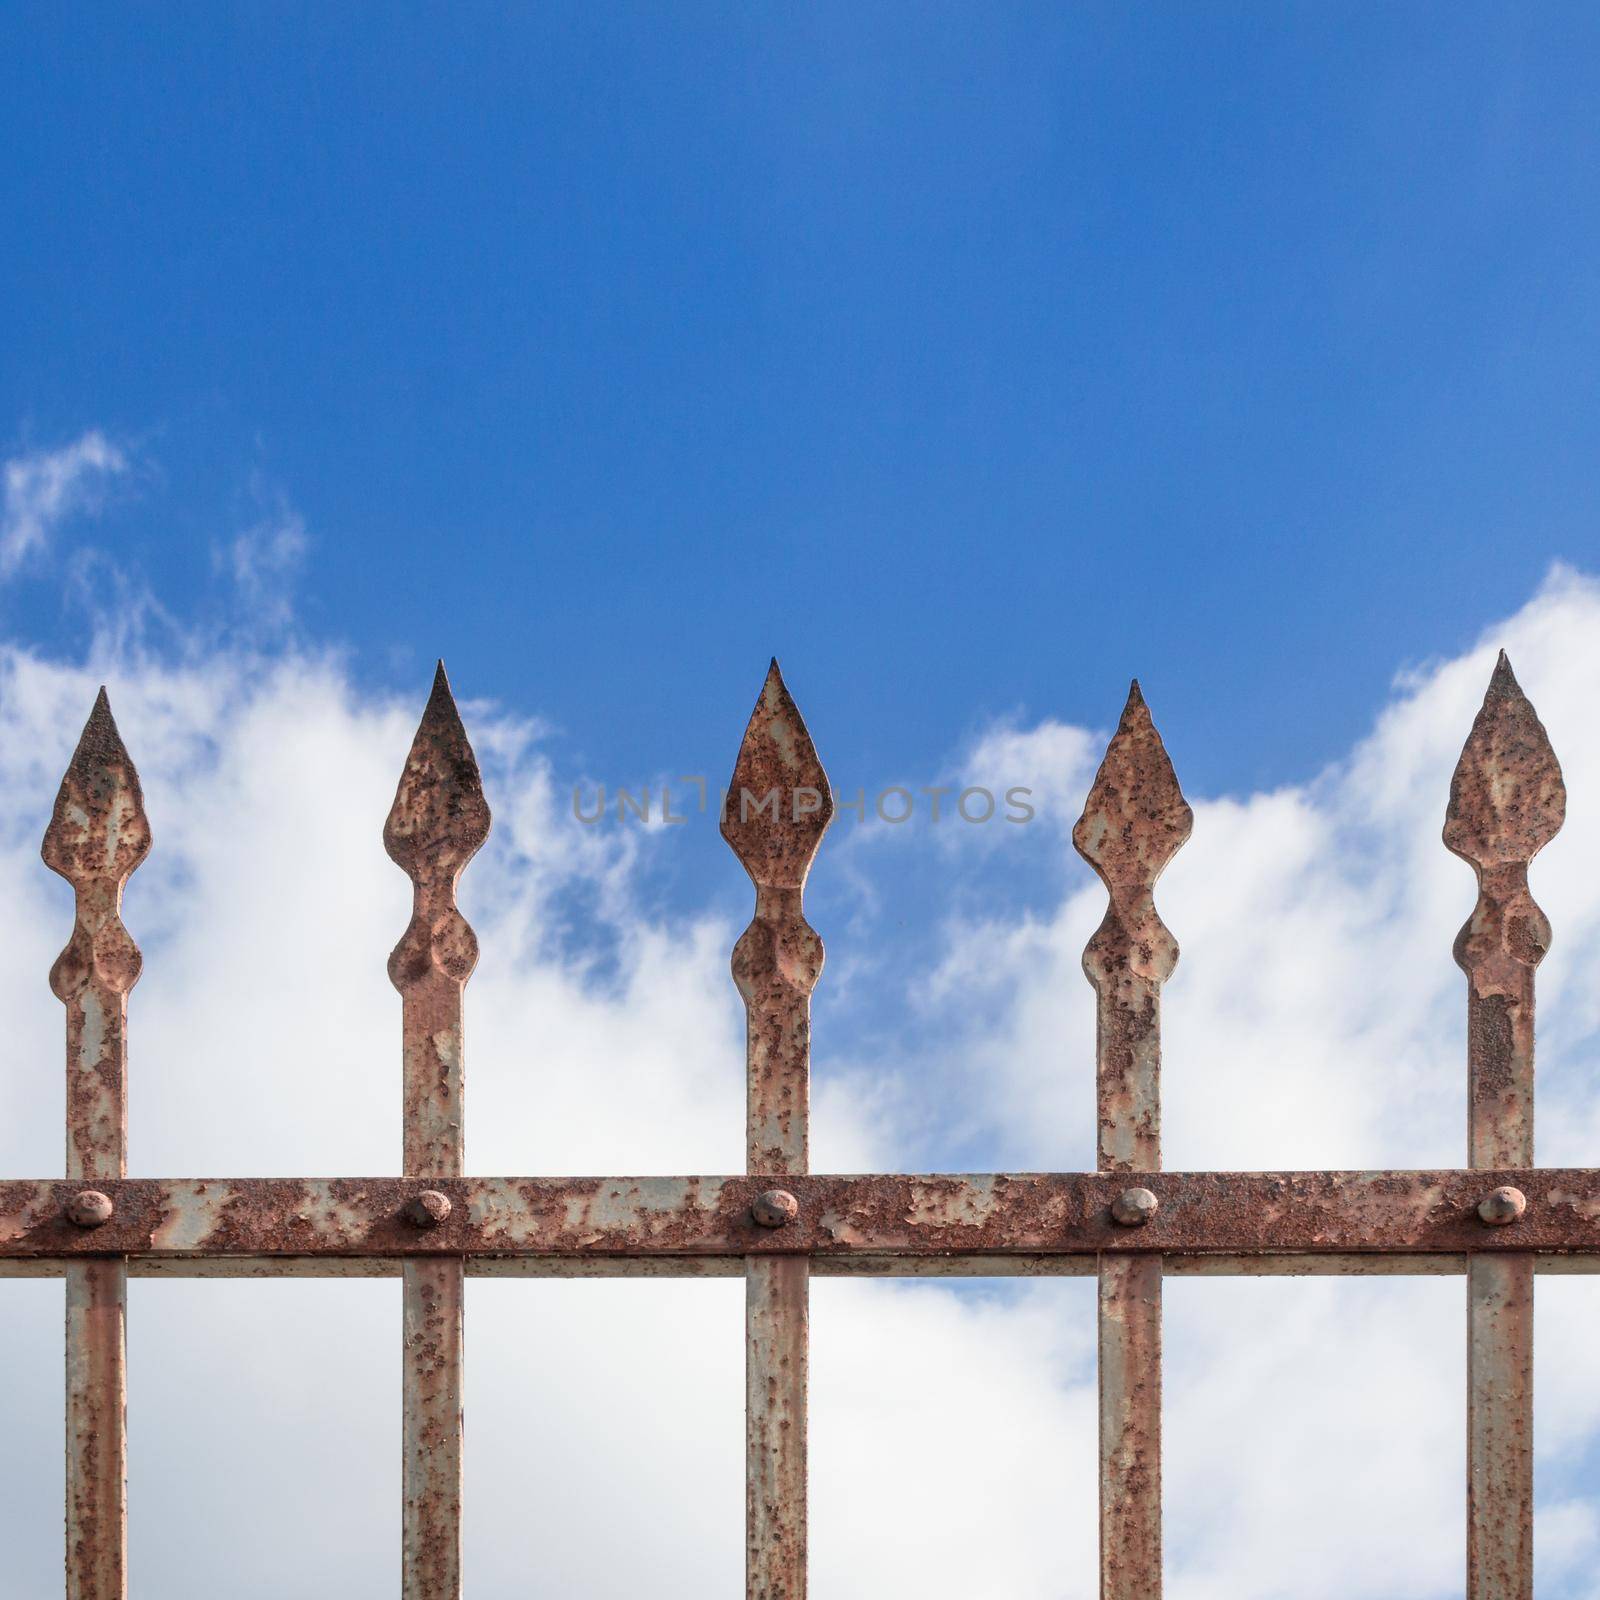 Details of a rusty fence decorated with spearheads and sky and clouds in the background.